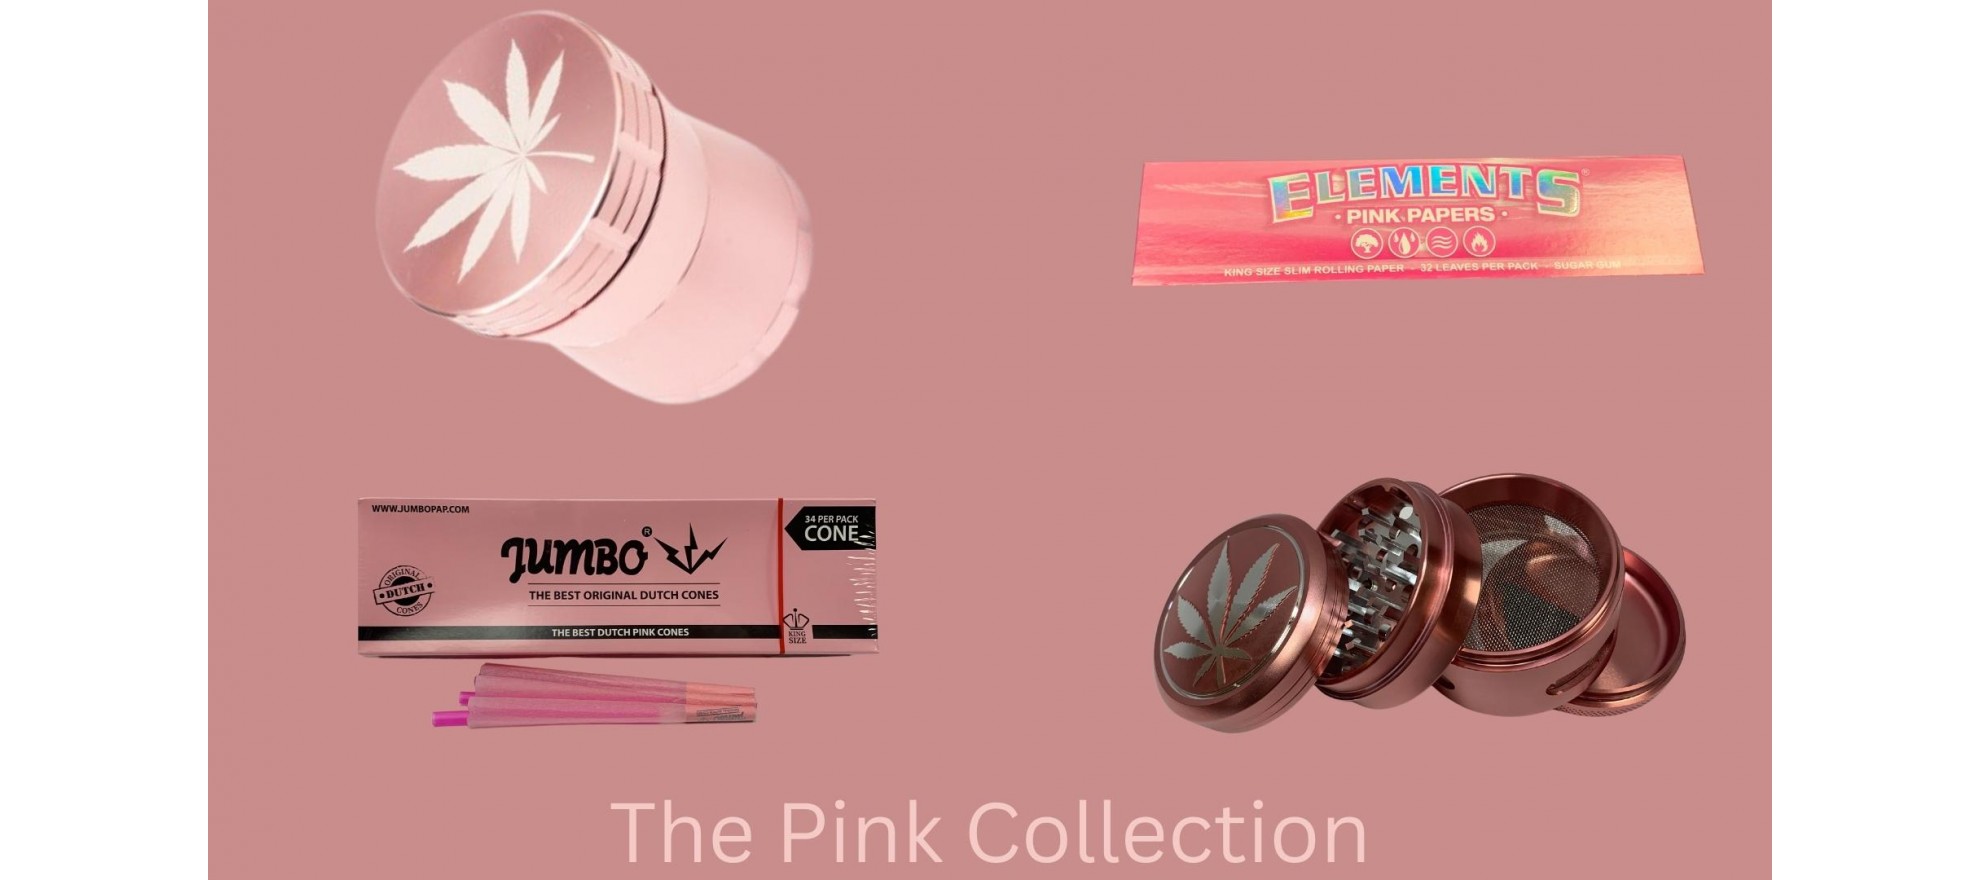 The Pink Collection